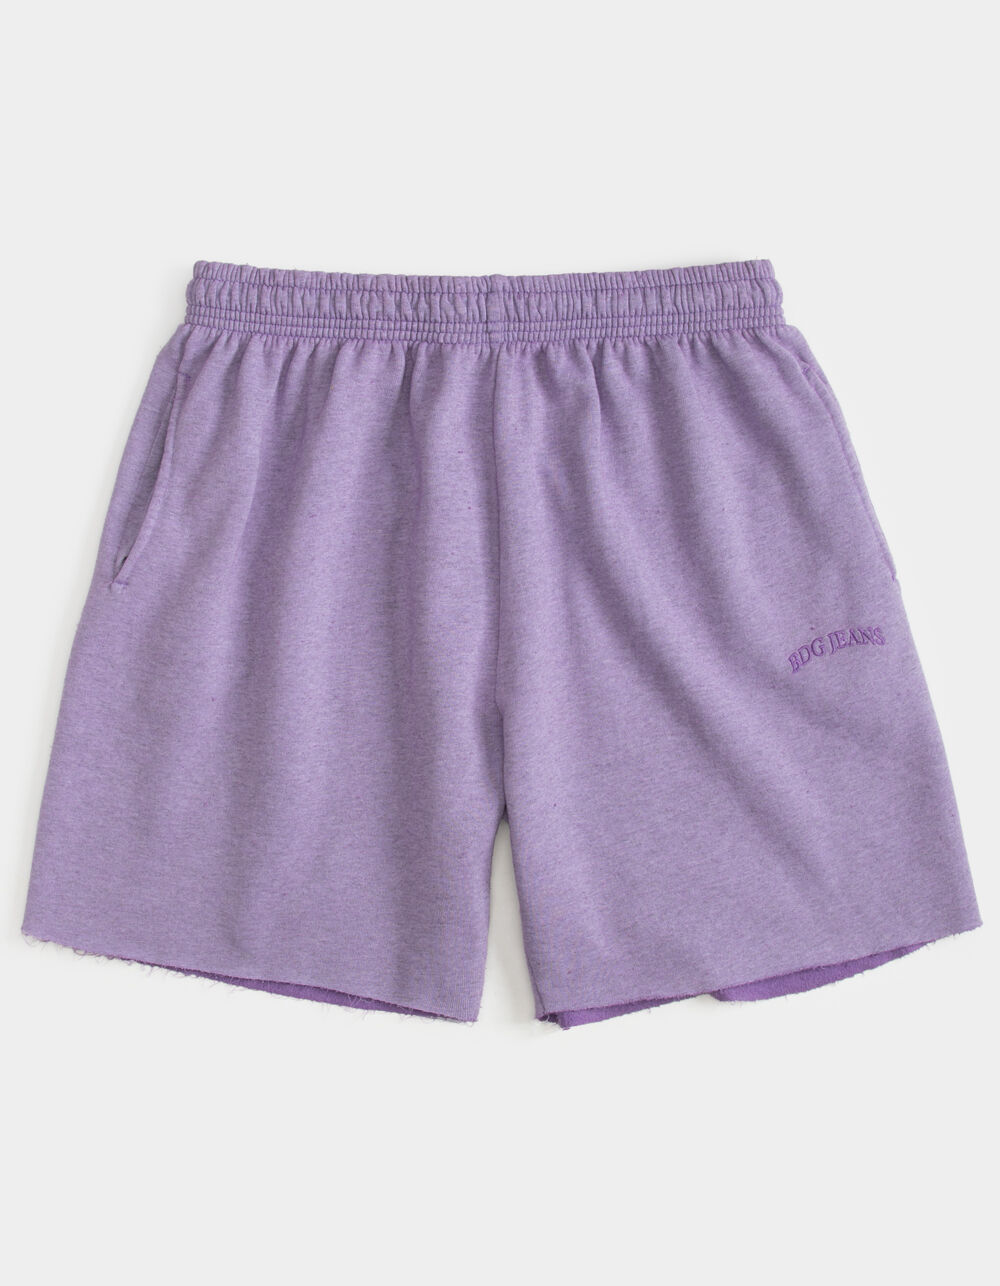 BDG Urban Outfitters Mens Jogger Sweat Shorts - LILAC | Tillys